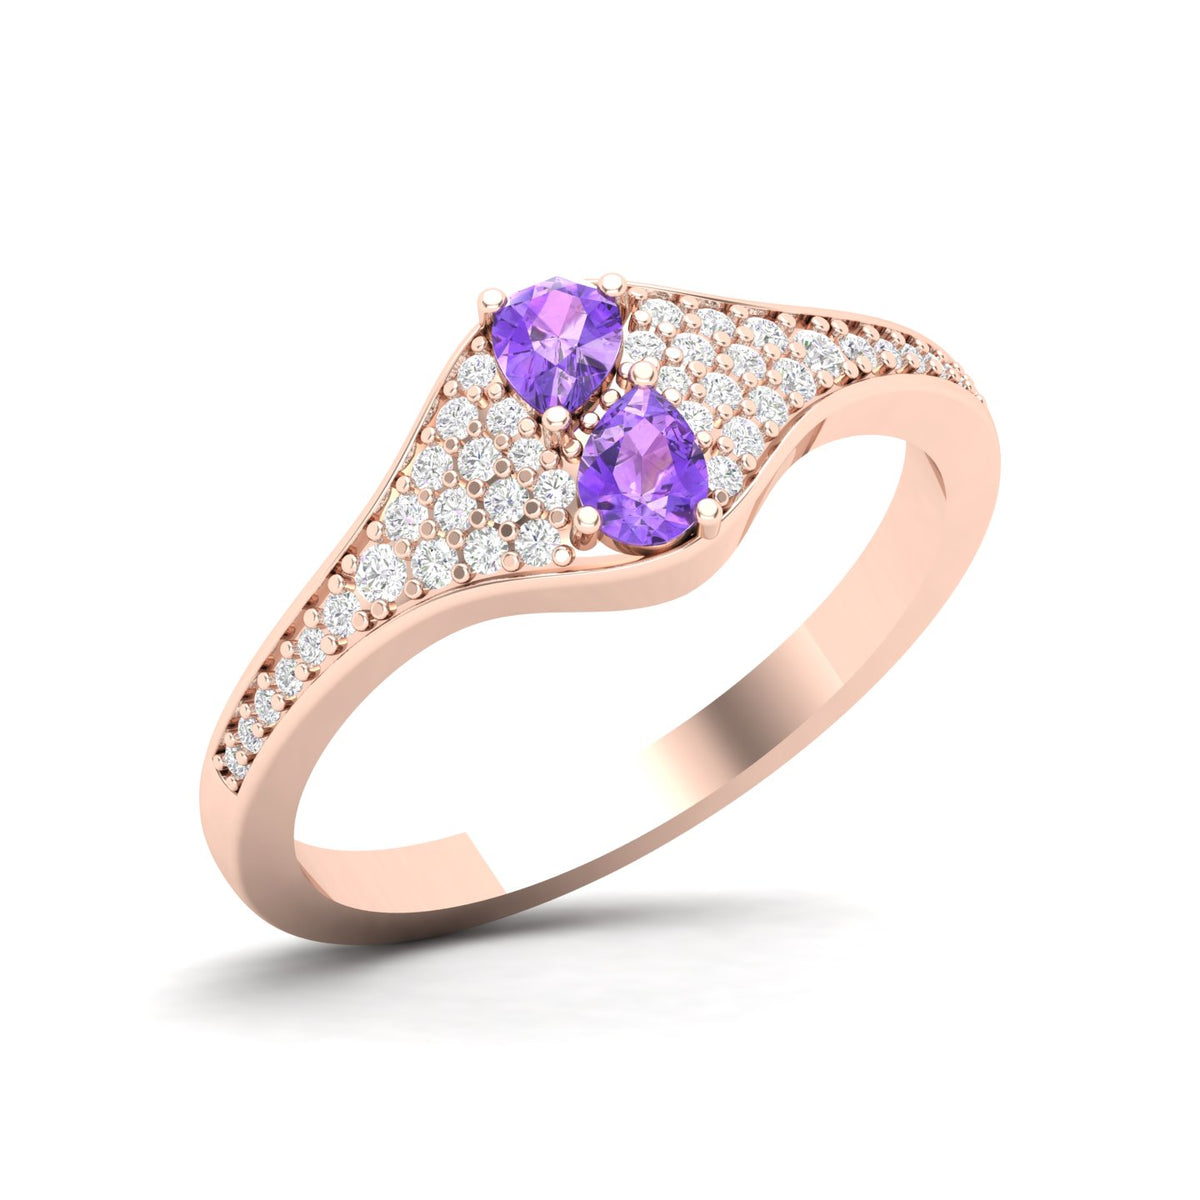 Maurya Two Stone Amethyst Svelte Ring with Accent Diamonds